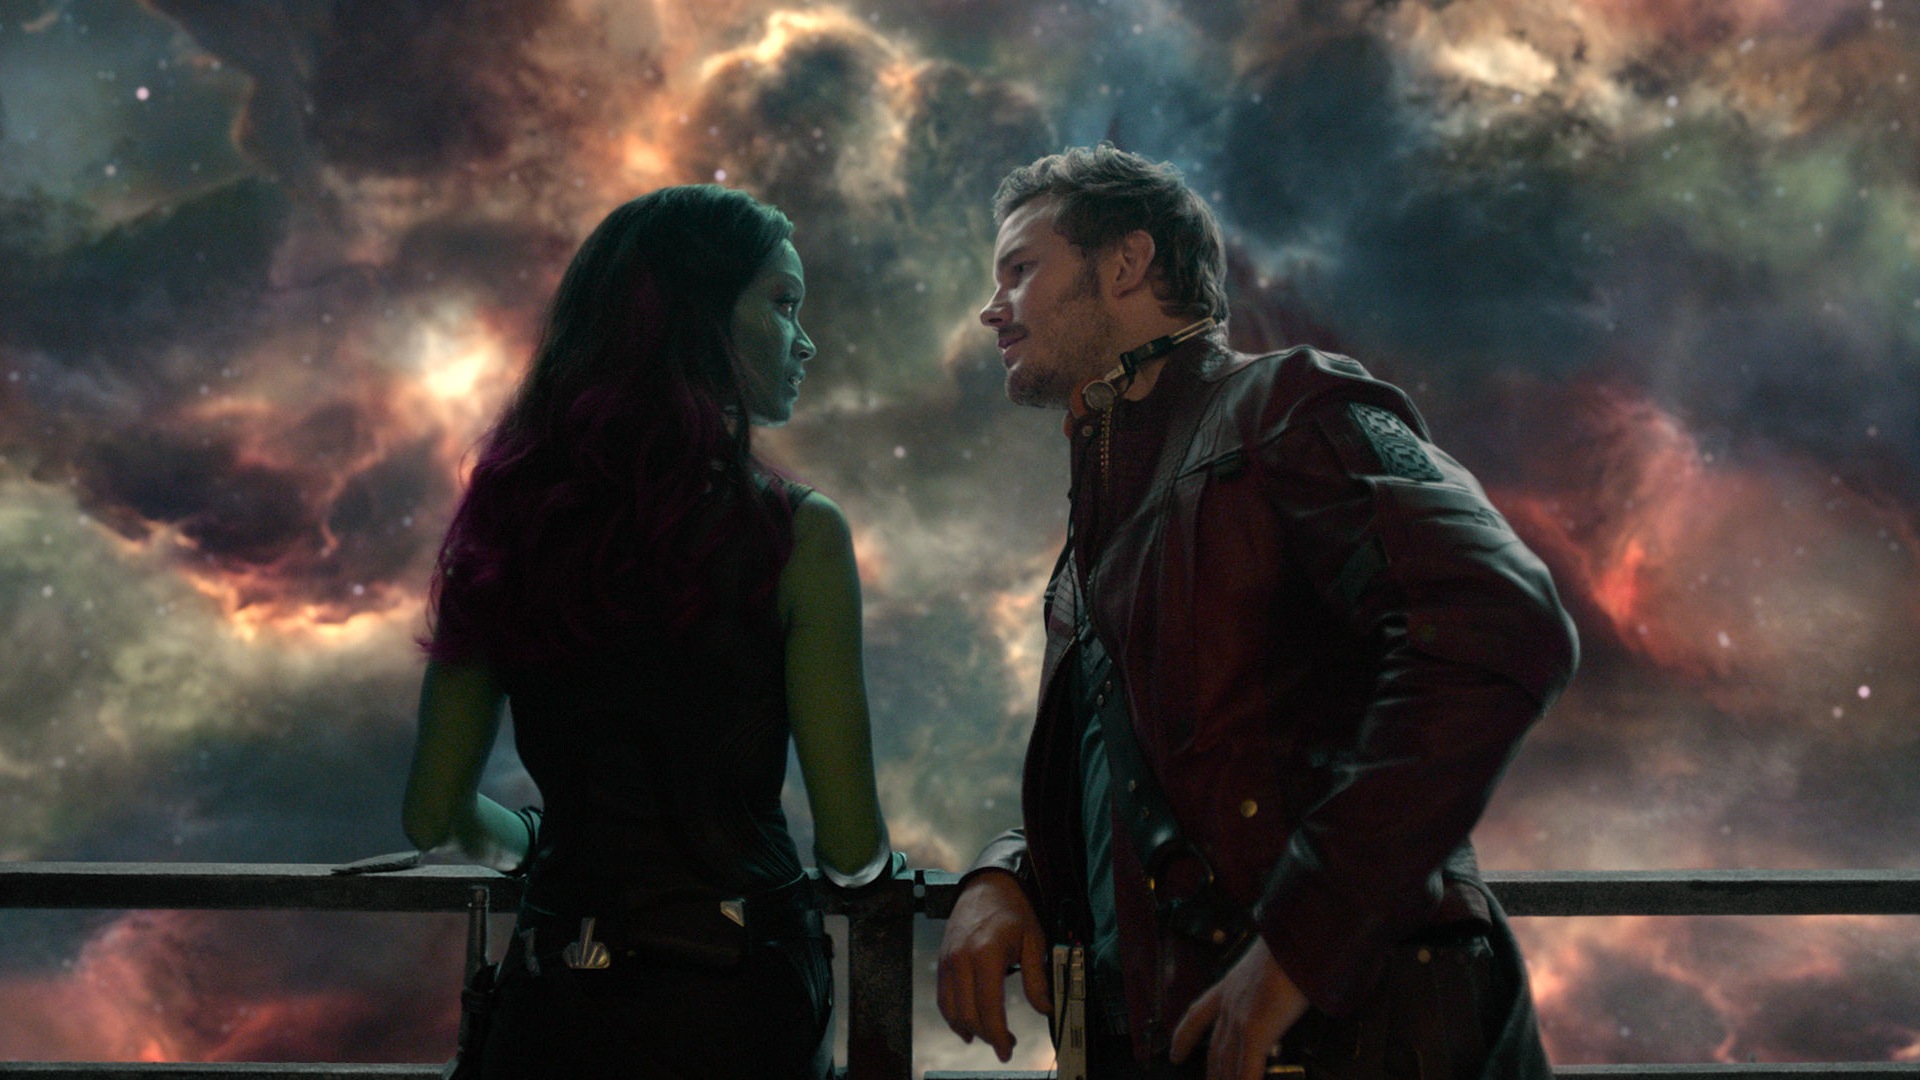 Guardians of the Galaxy 2014 HD movie wallpapers #11 - 1920x1080